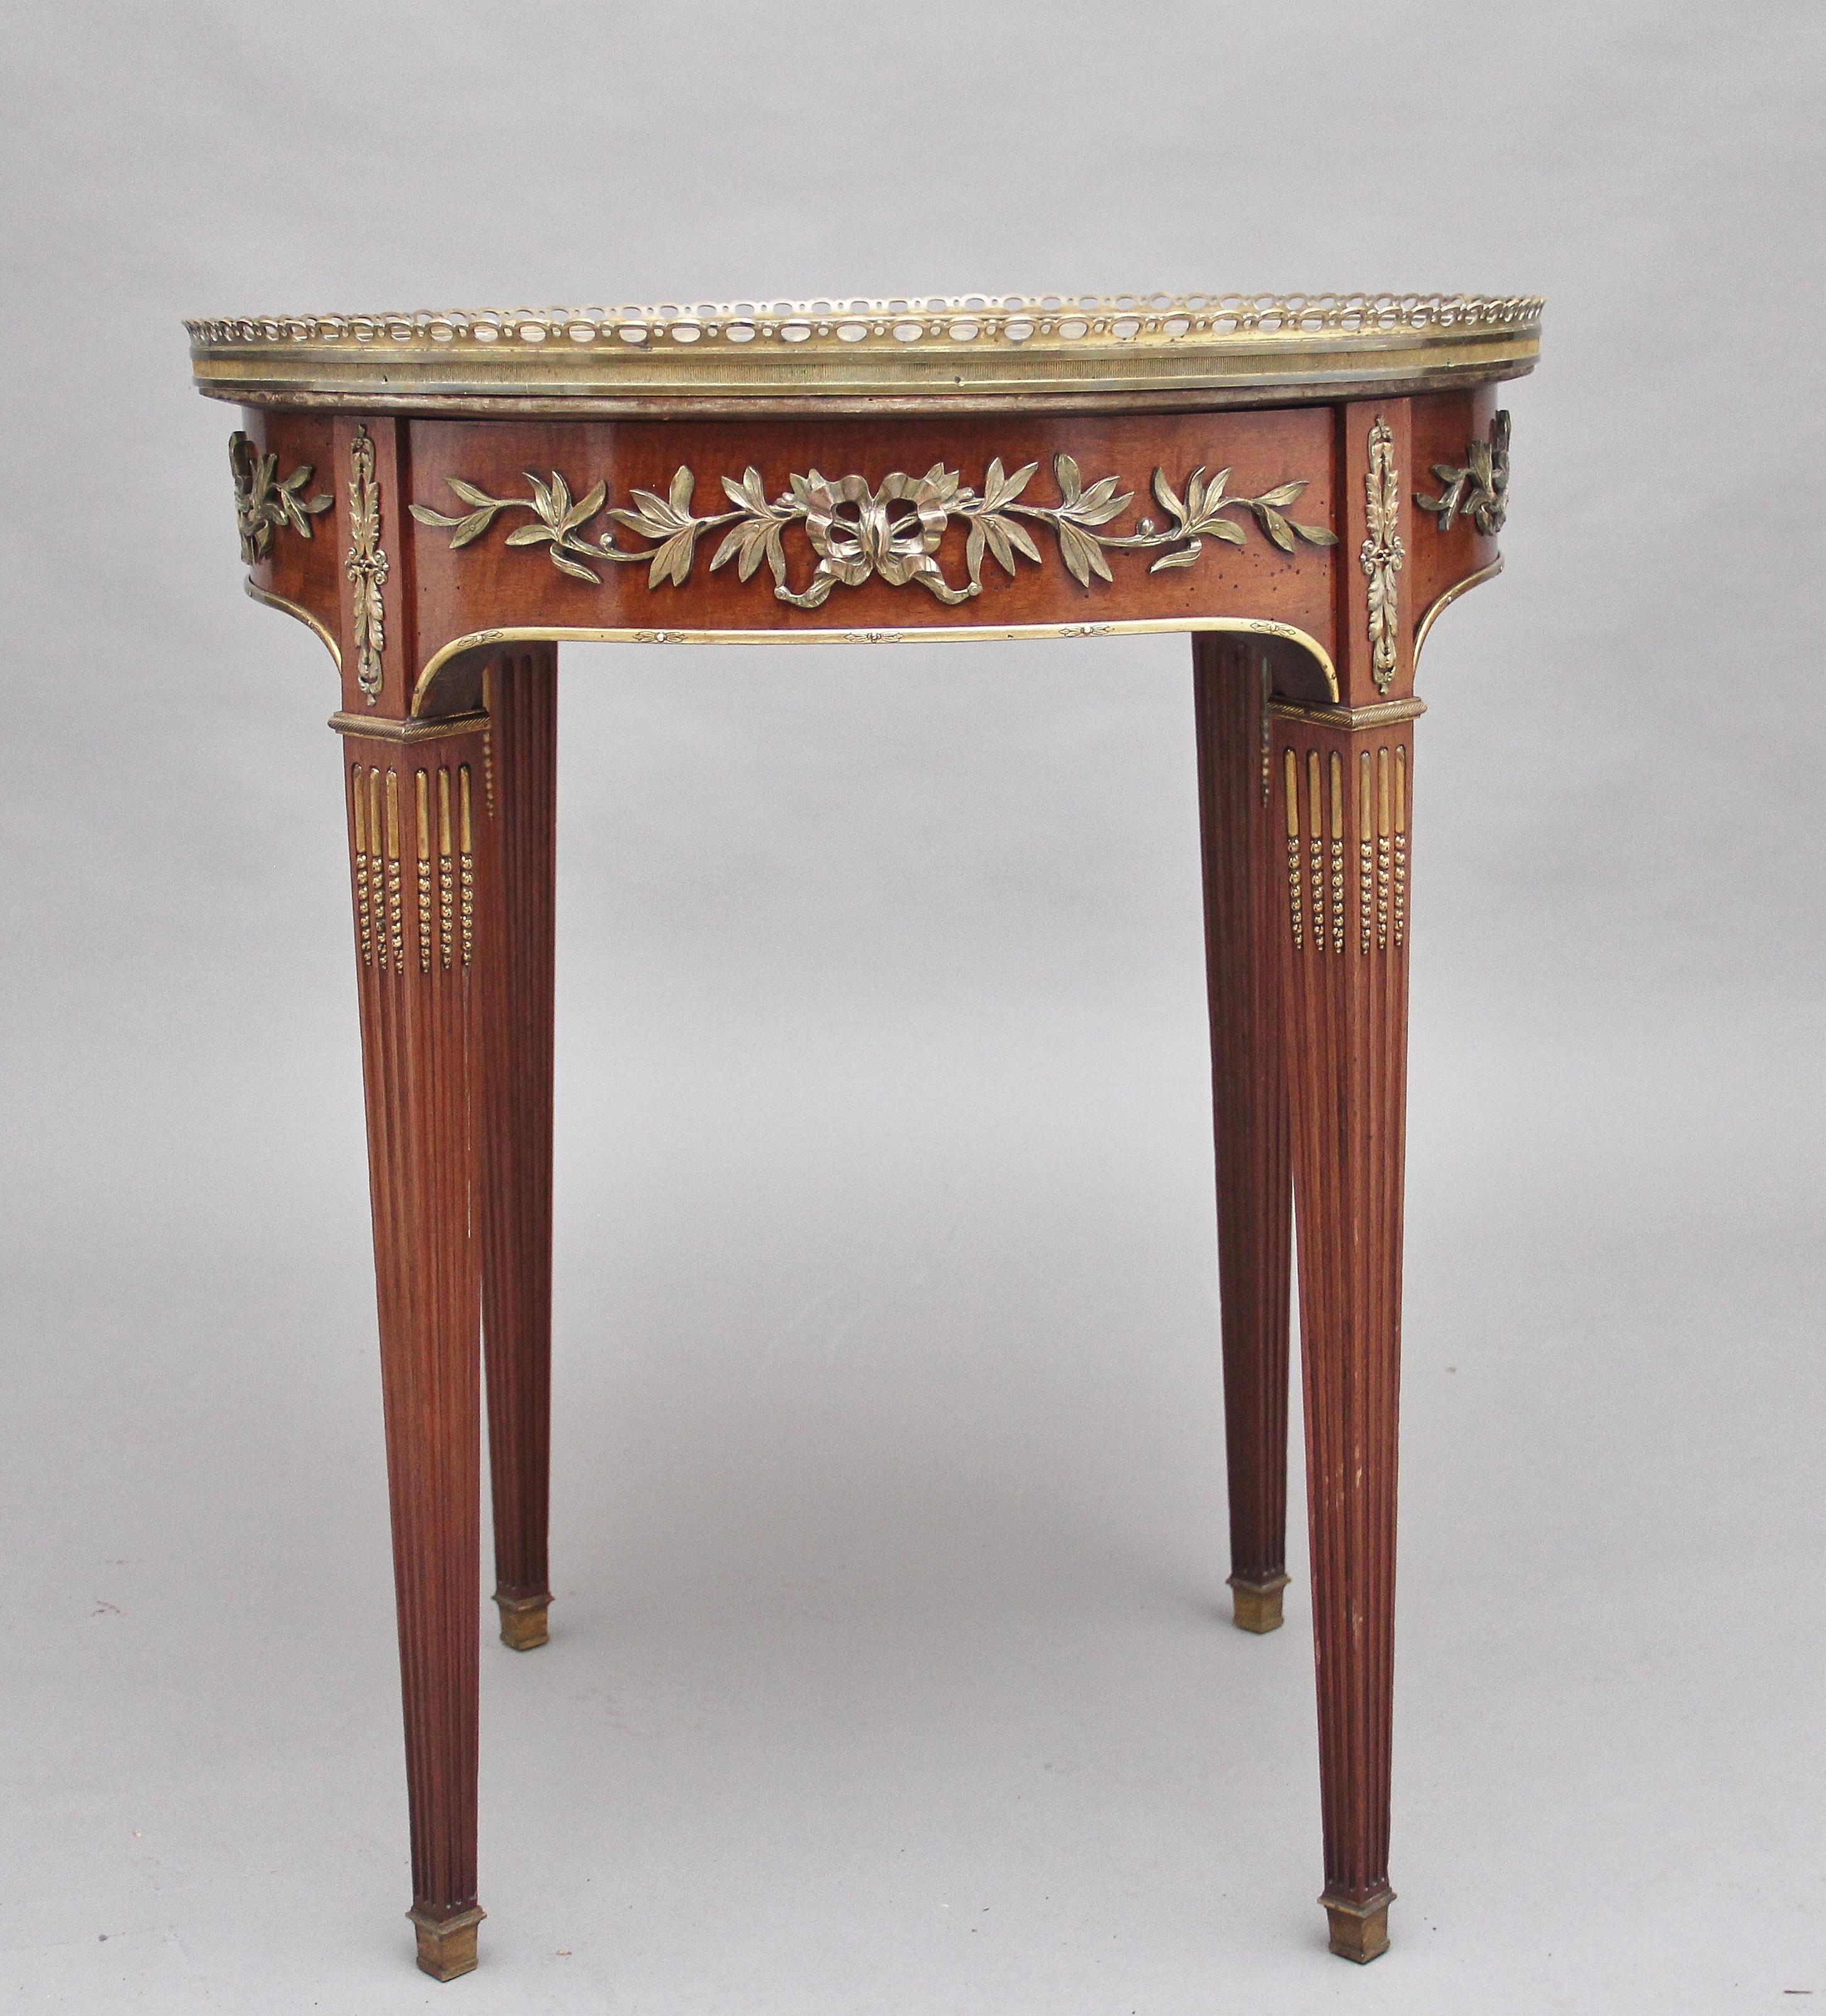 19th century French mahogany and marble-top occasional table, the circular top with a pierced brass gallery with a decorative grey marble insert, the shaped apron below decorated with floral ormolu and having a mahogany lined drawer at the front,